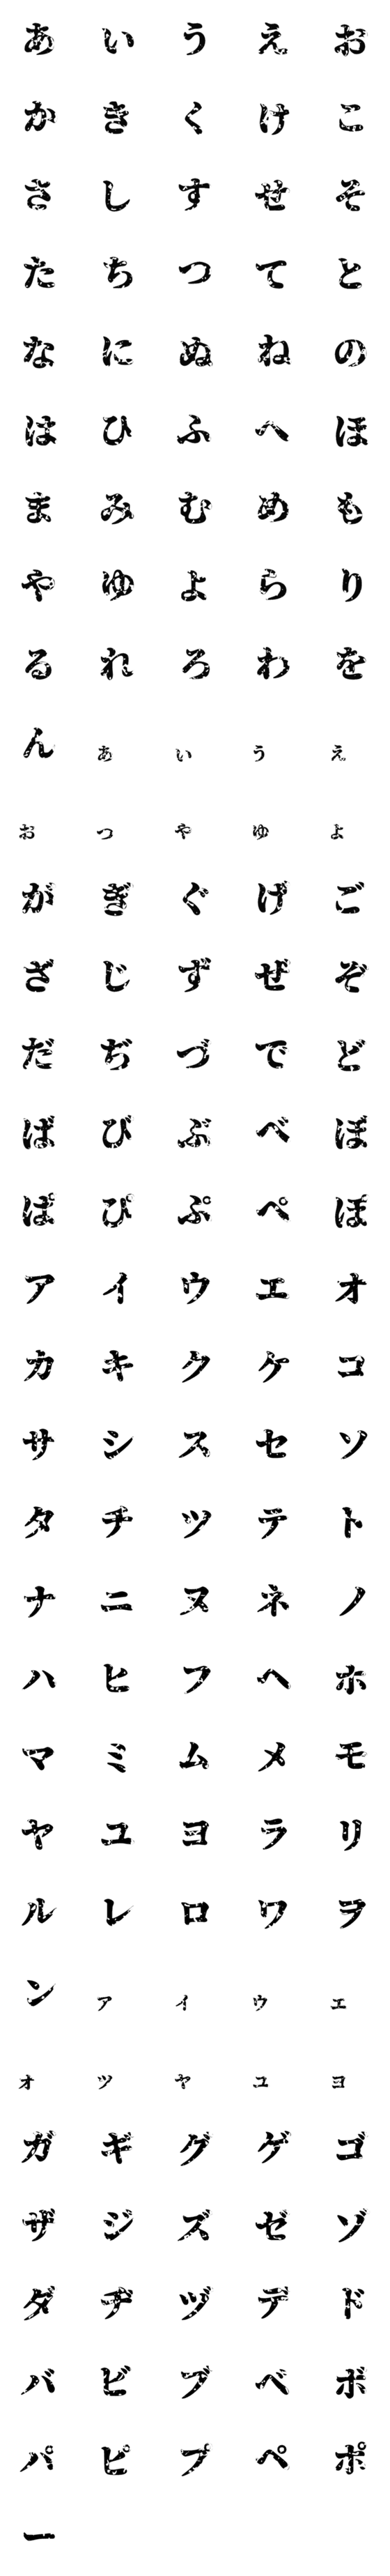 [LINE絵文字]ホラー字（改）の画像一覧